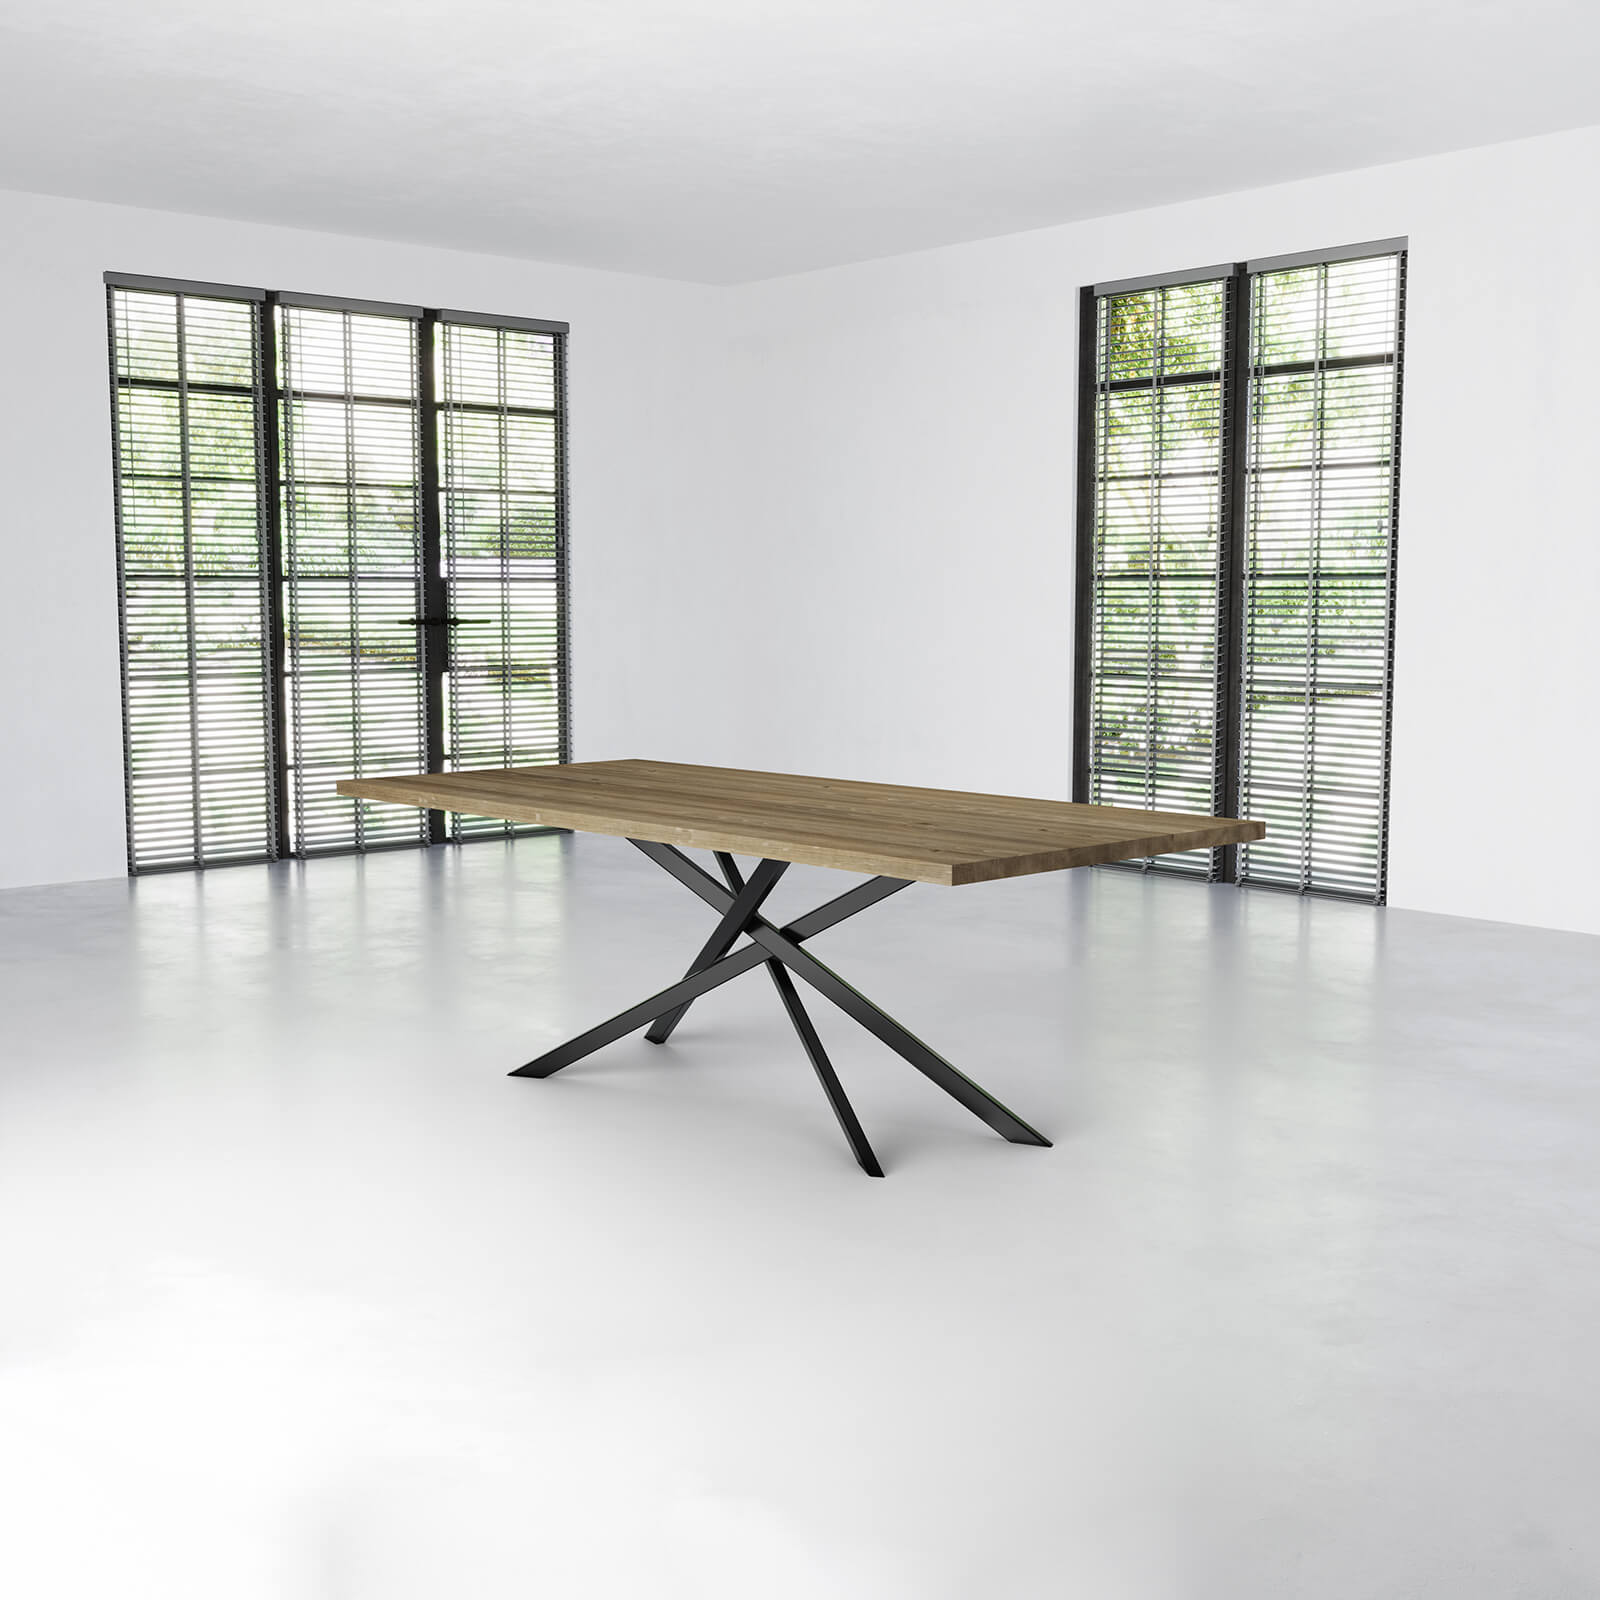 Wall 3D Rendering for a Brown Table Design